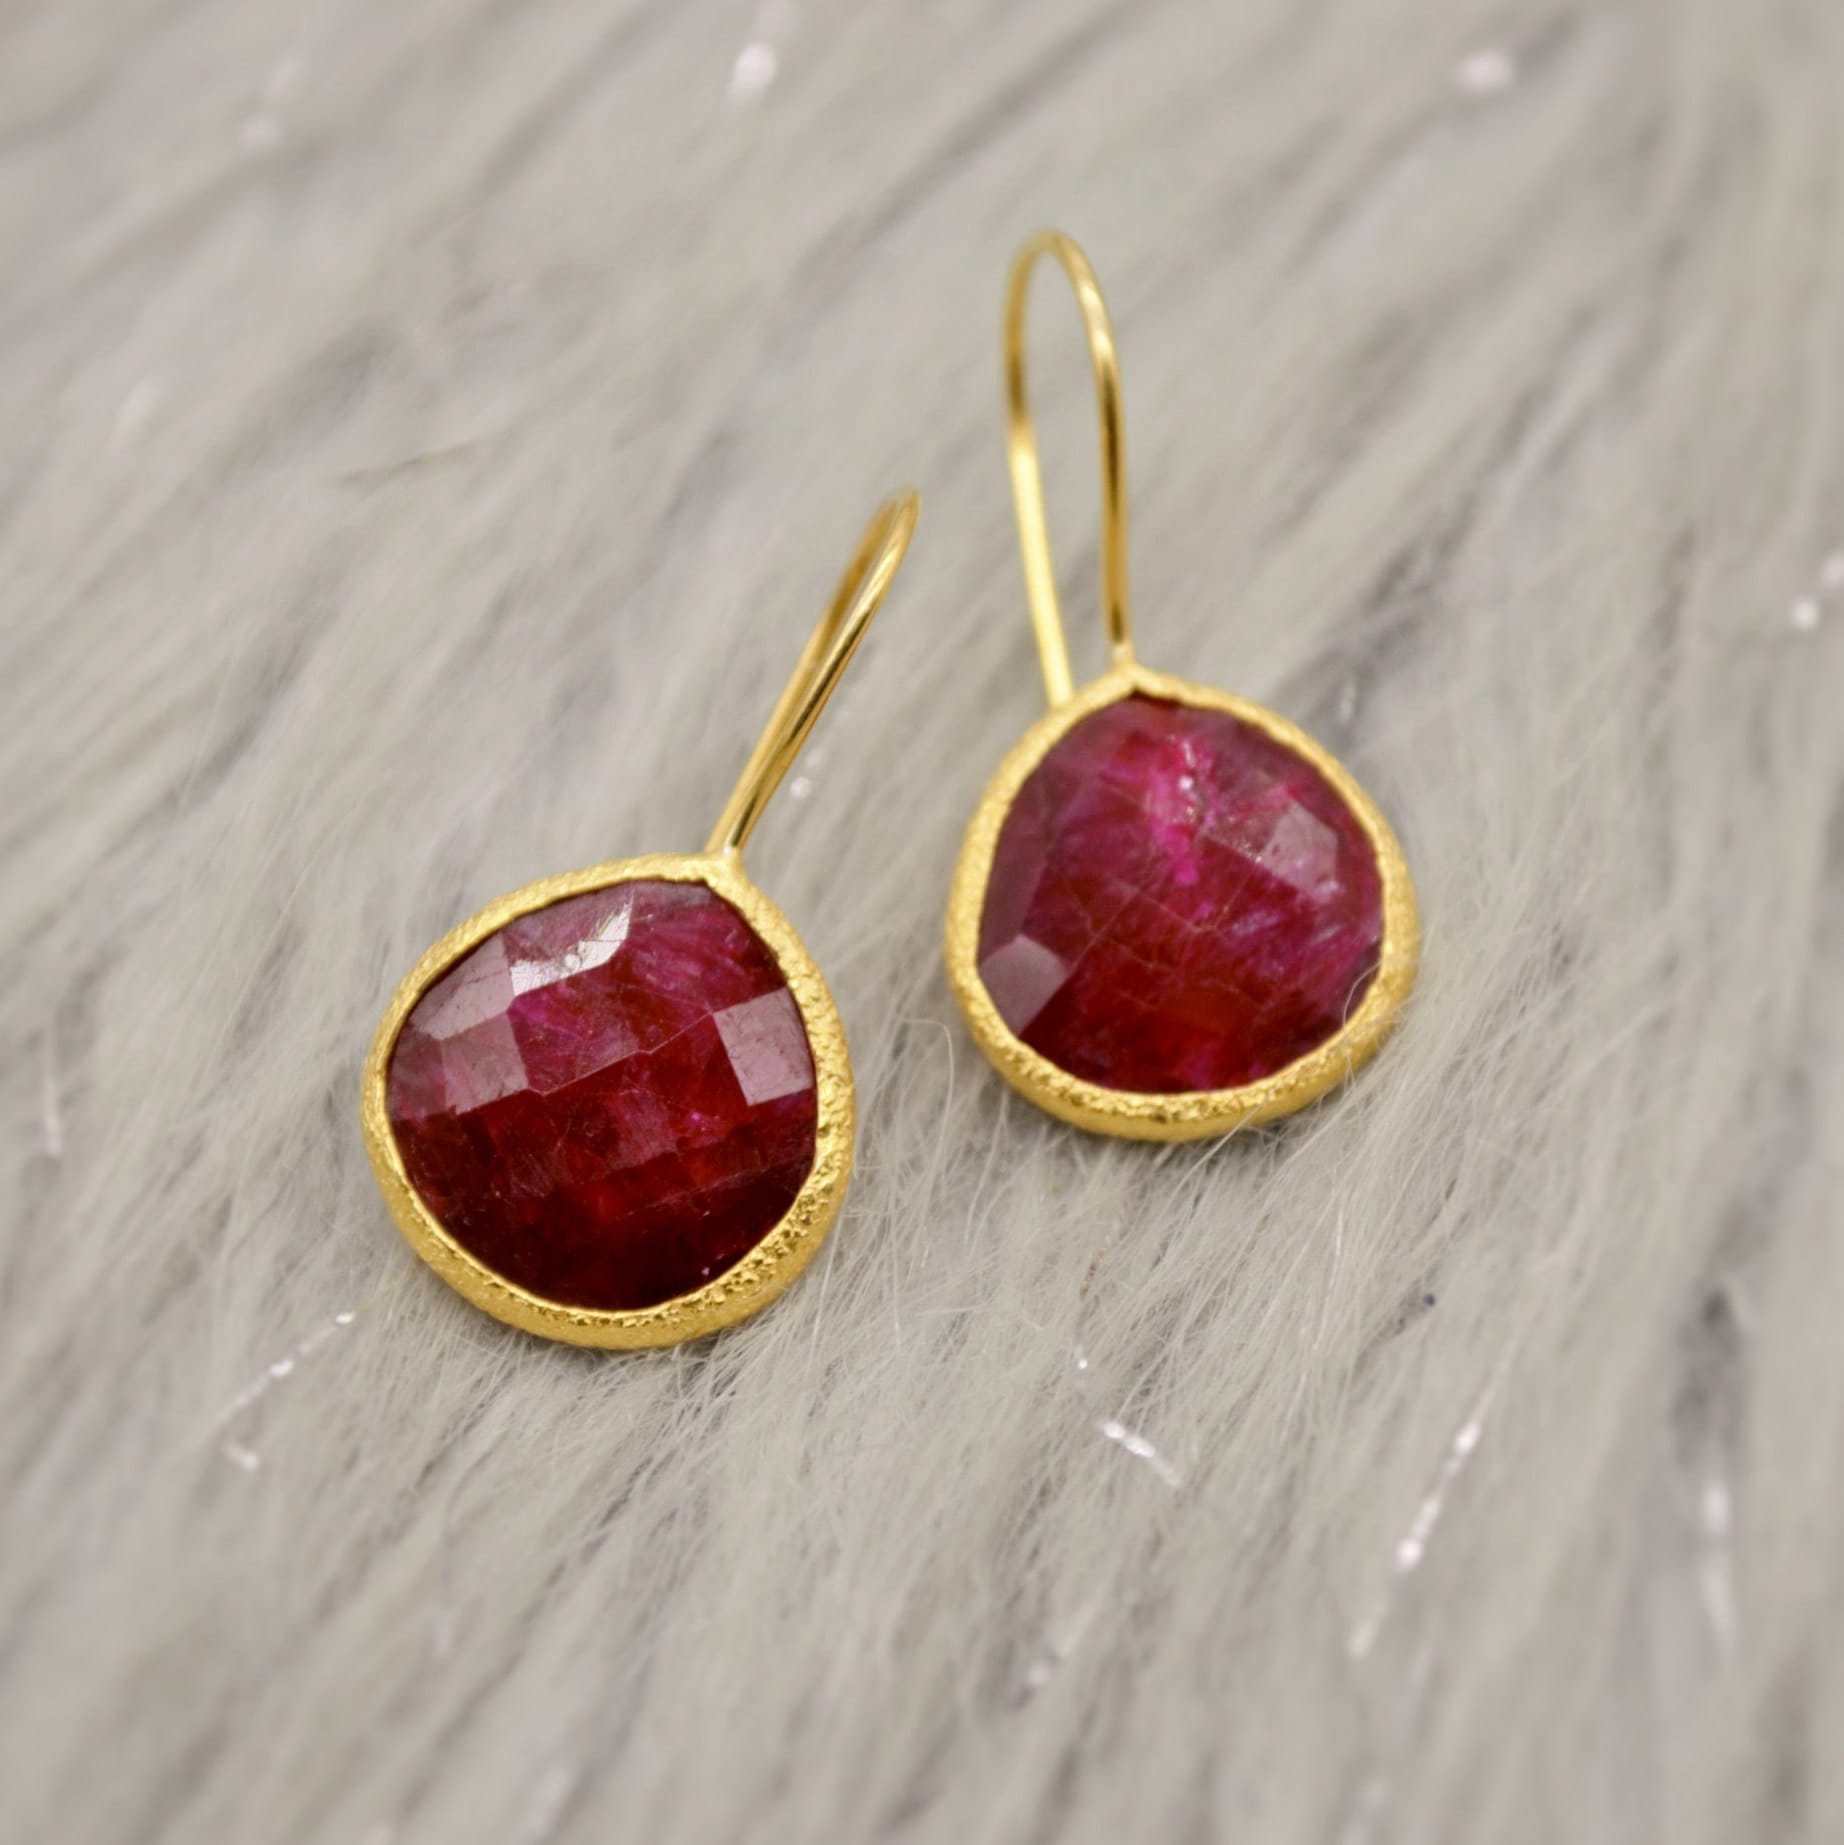 Dyed Red Ruby Silver Dangle Drop Earrings, Gold Plated Sterling Silver, Birthday Gifts For Her, Handmade Gemstone July Birthstone Earrings